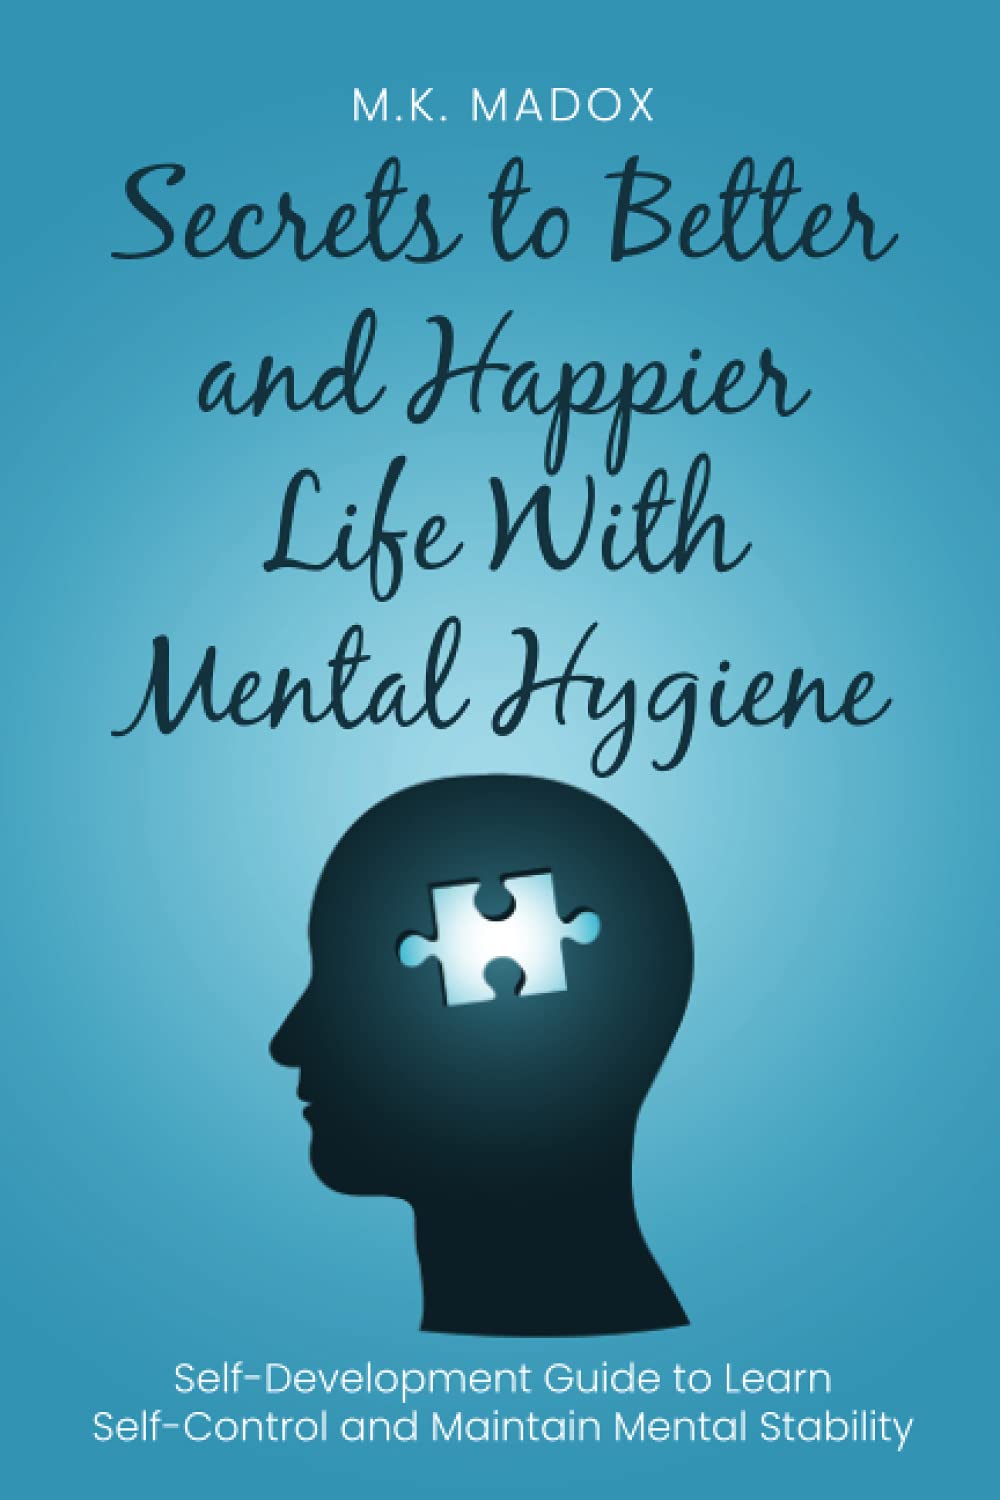 MK Madox Shares the Secrets to Mental Hygiene and Habits in His Book